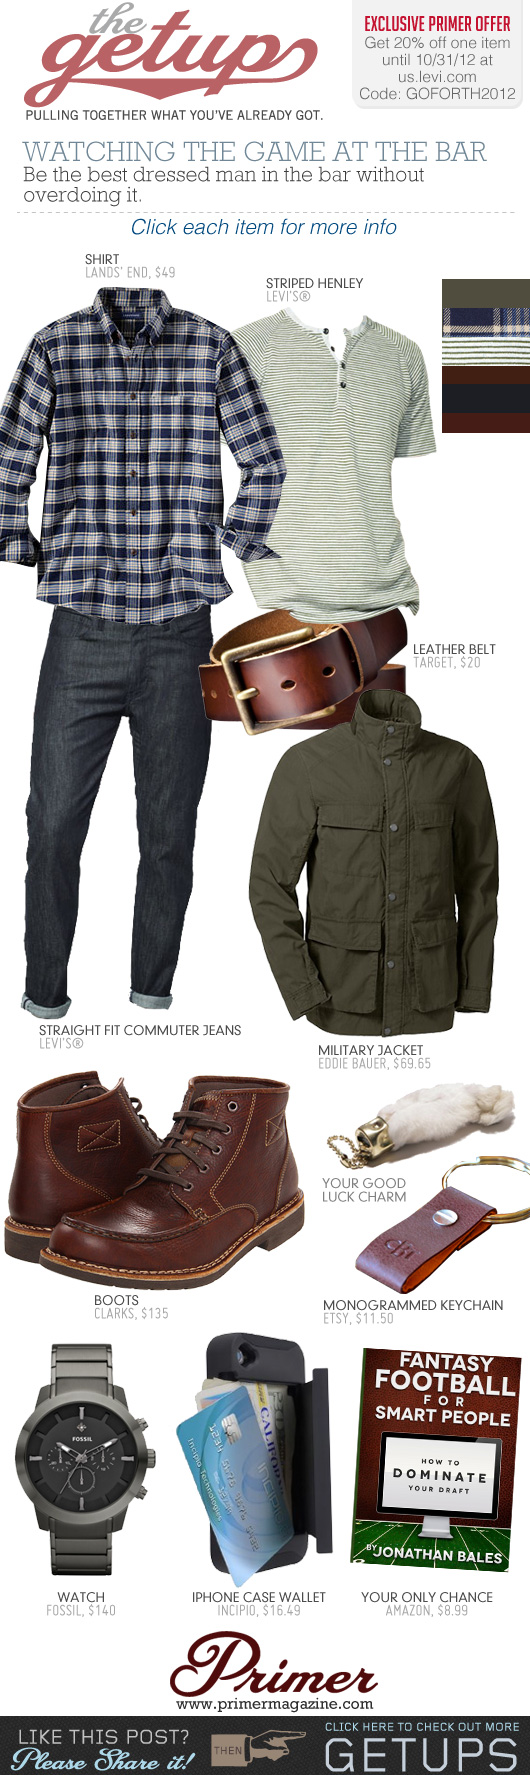 The Getup: Watching the Game at the Bar - Men\'s outfit inspiration with green jacket, dark blue jeans, and brown boots